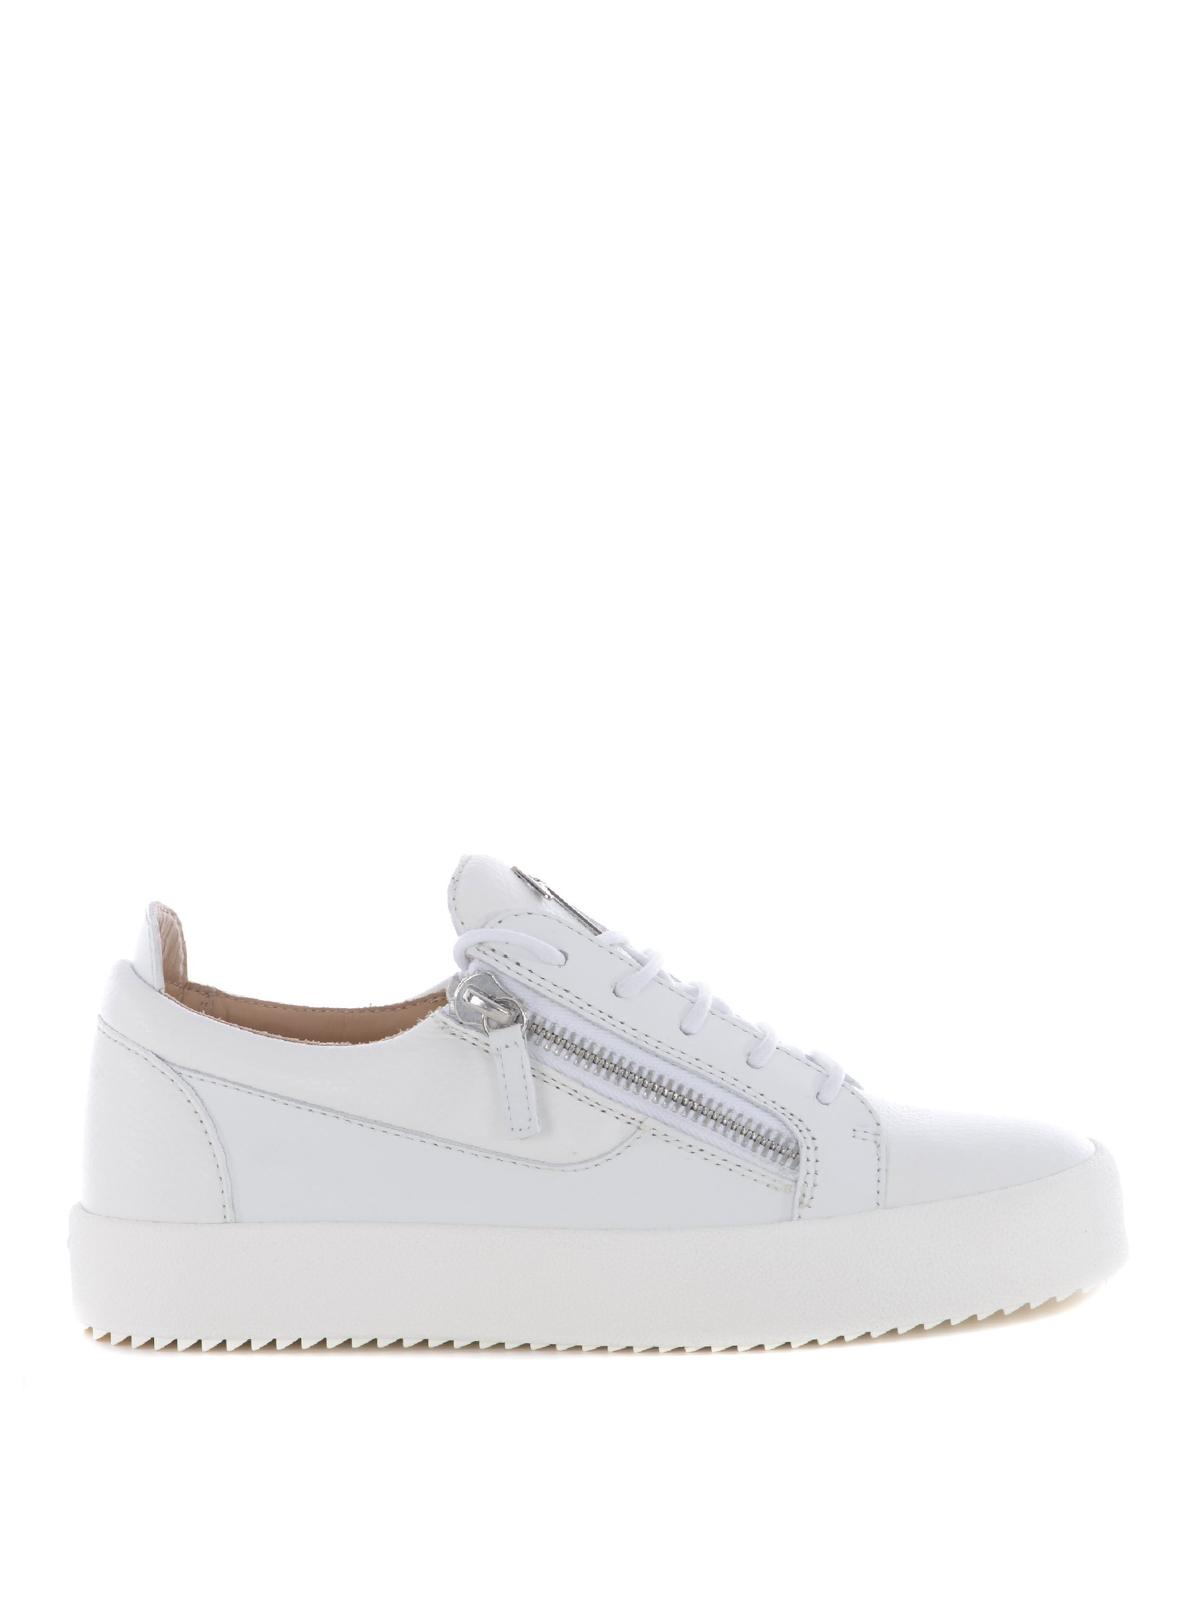 Frankie white leather sneakers